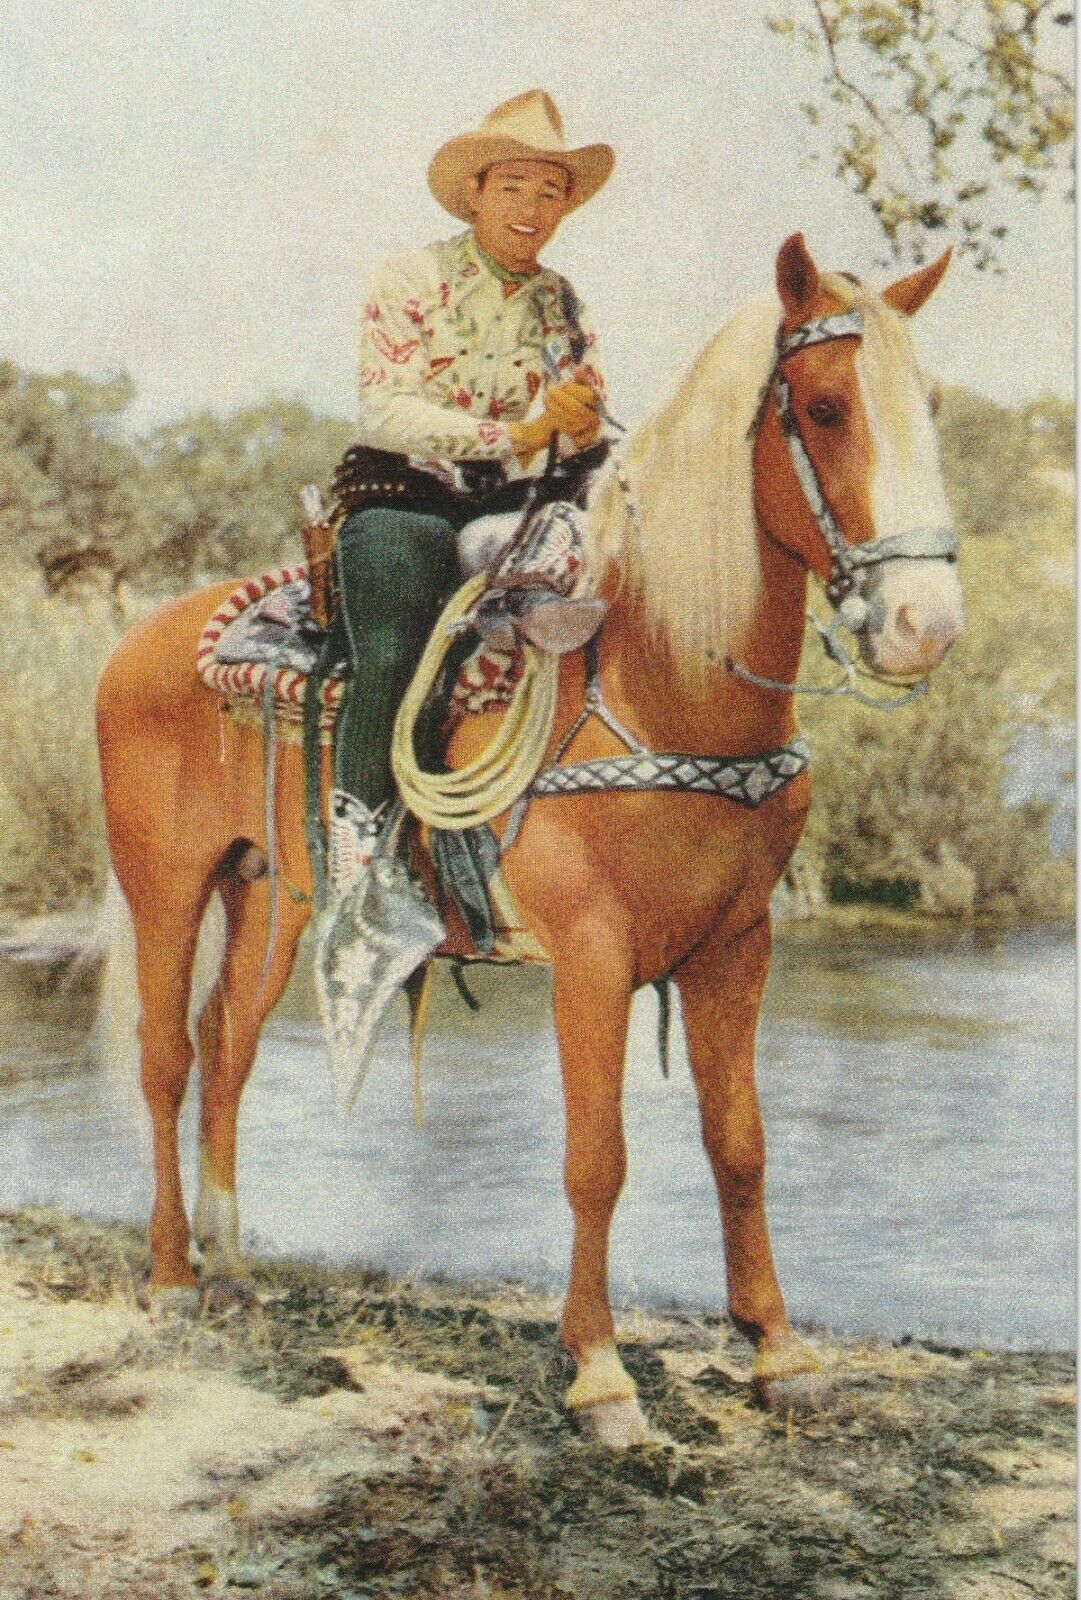 Roy Rogers and horse  Trigger postcard made from vintage photograph